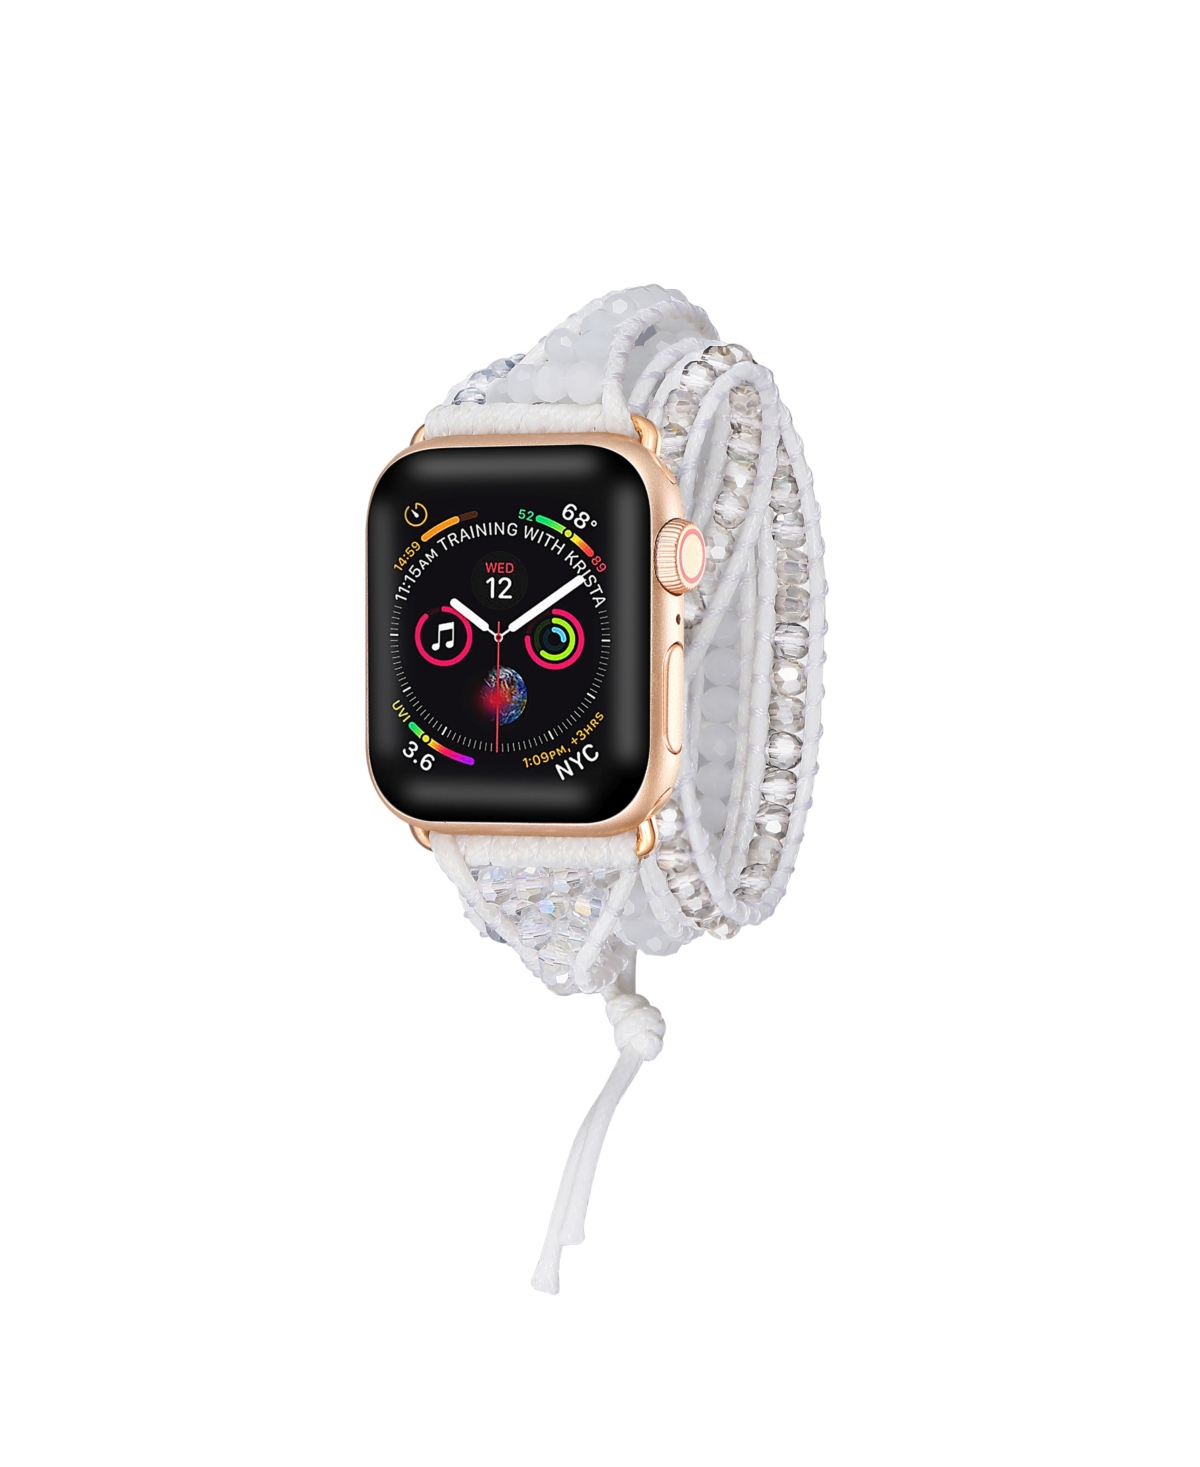 Men's and Women's Silver-Tone White Jewelry Wrap for Apple Watch 38mm - Multi